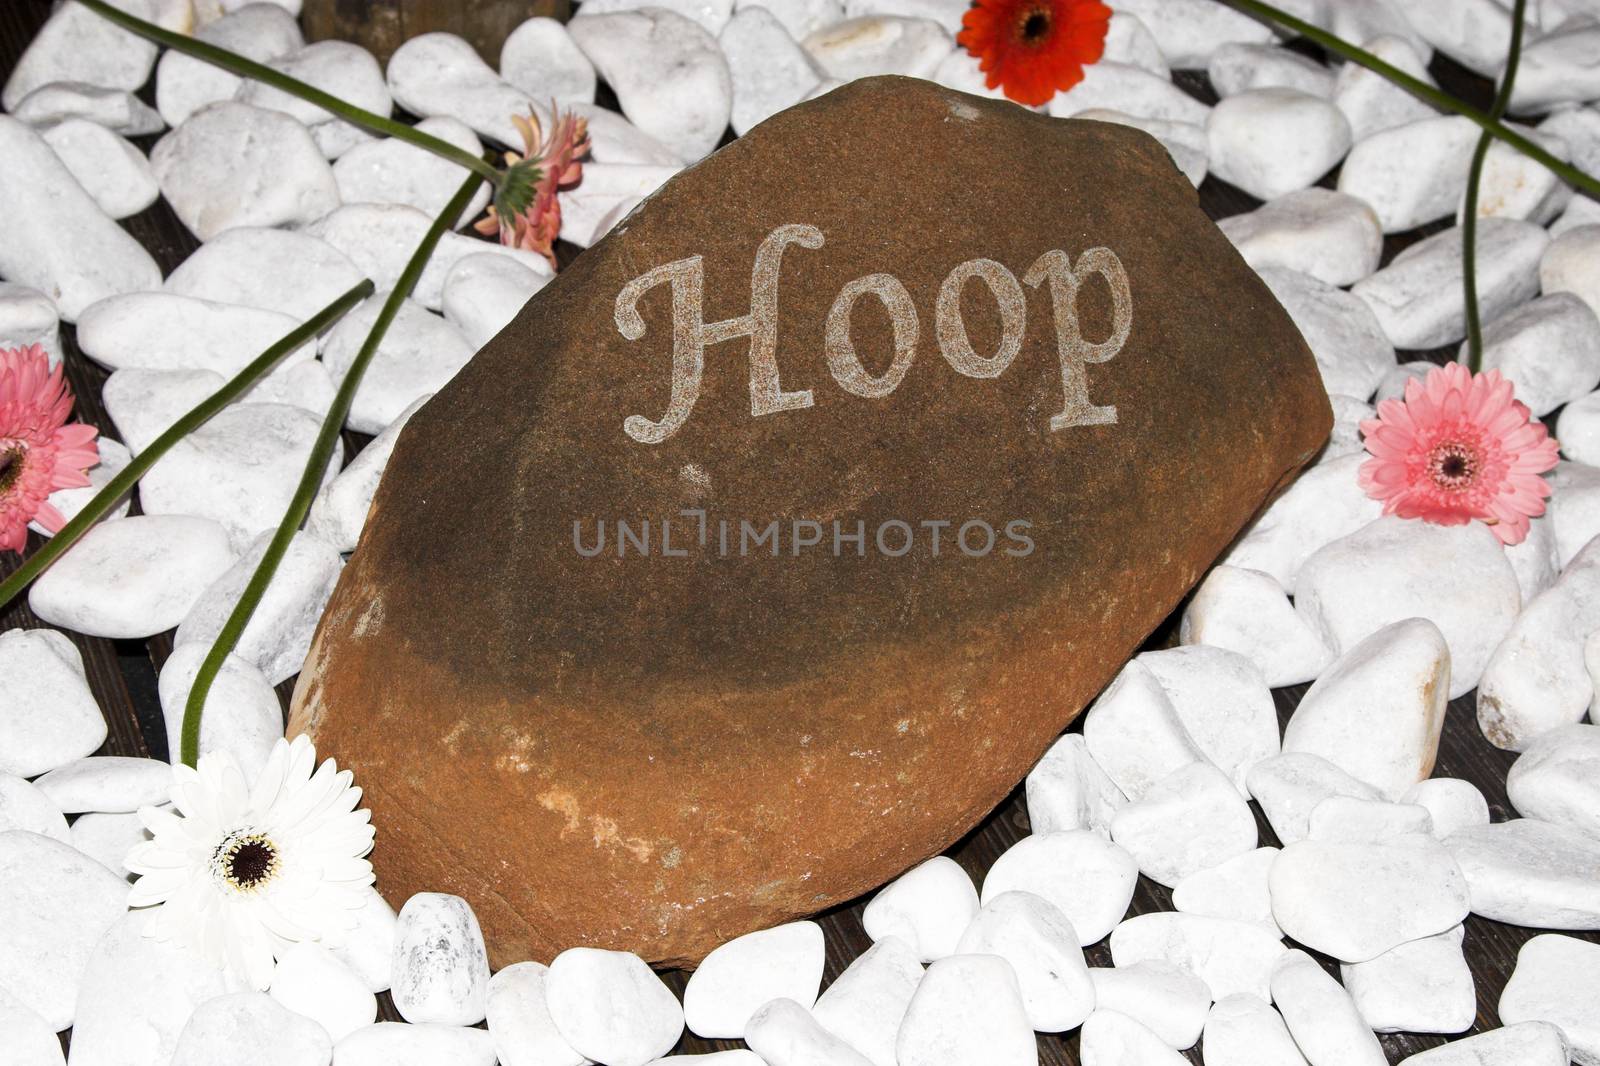 Small sign amongst pebbles with an afrikaans word meaning Hope